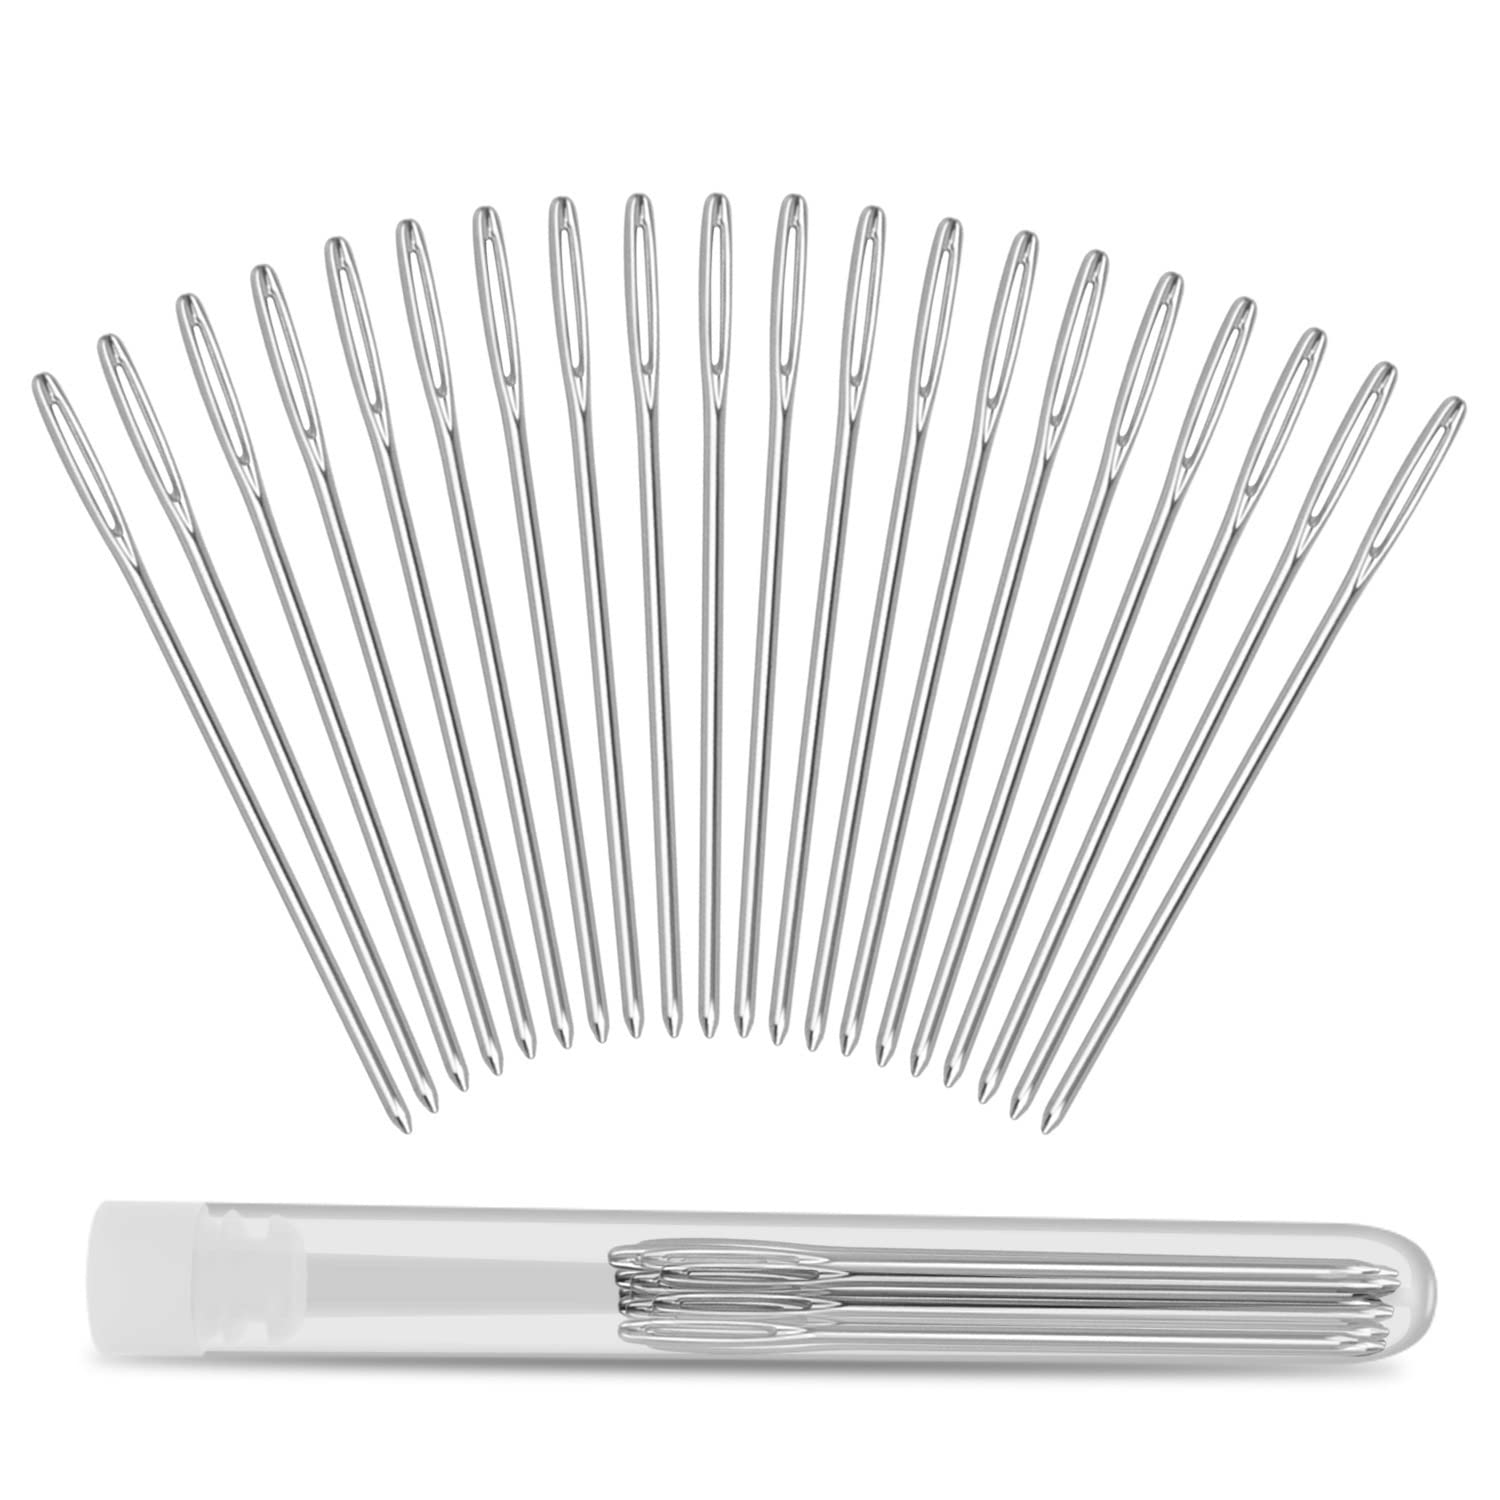 ERKOON 20 Pieces Large-Eye Blunt Needles 52mm Large Eye Sewing